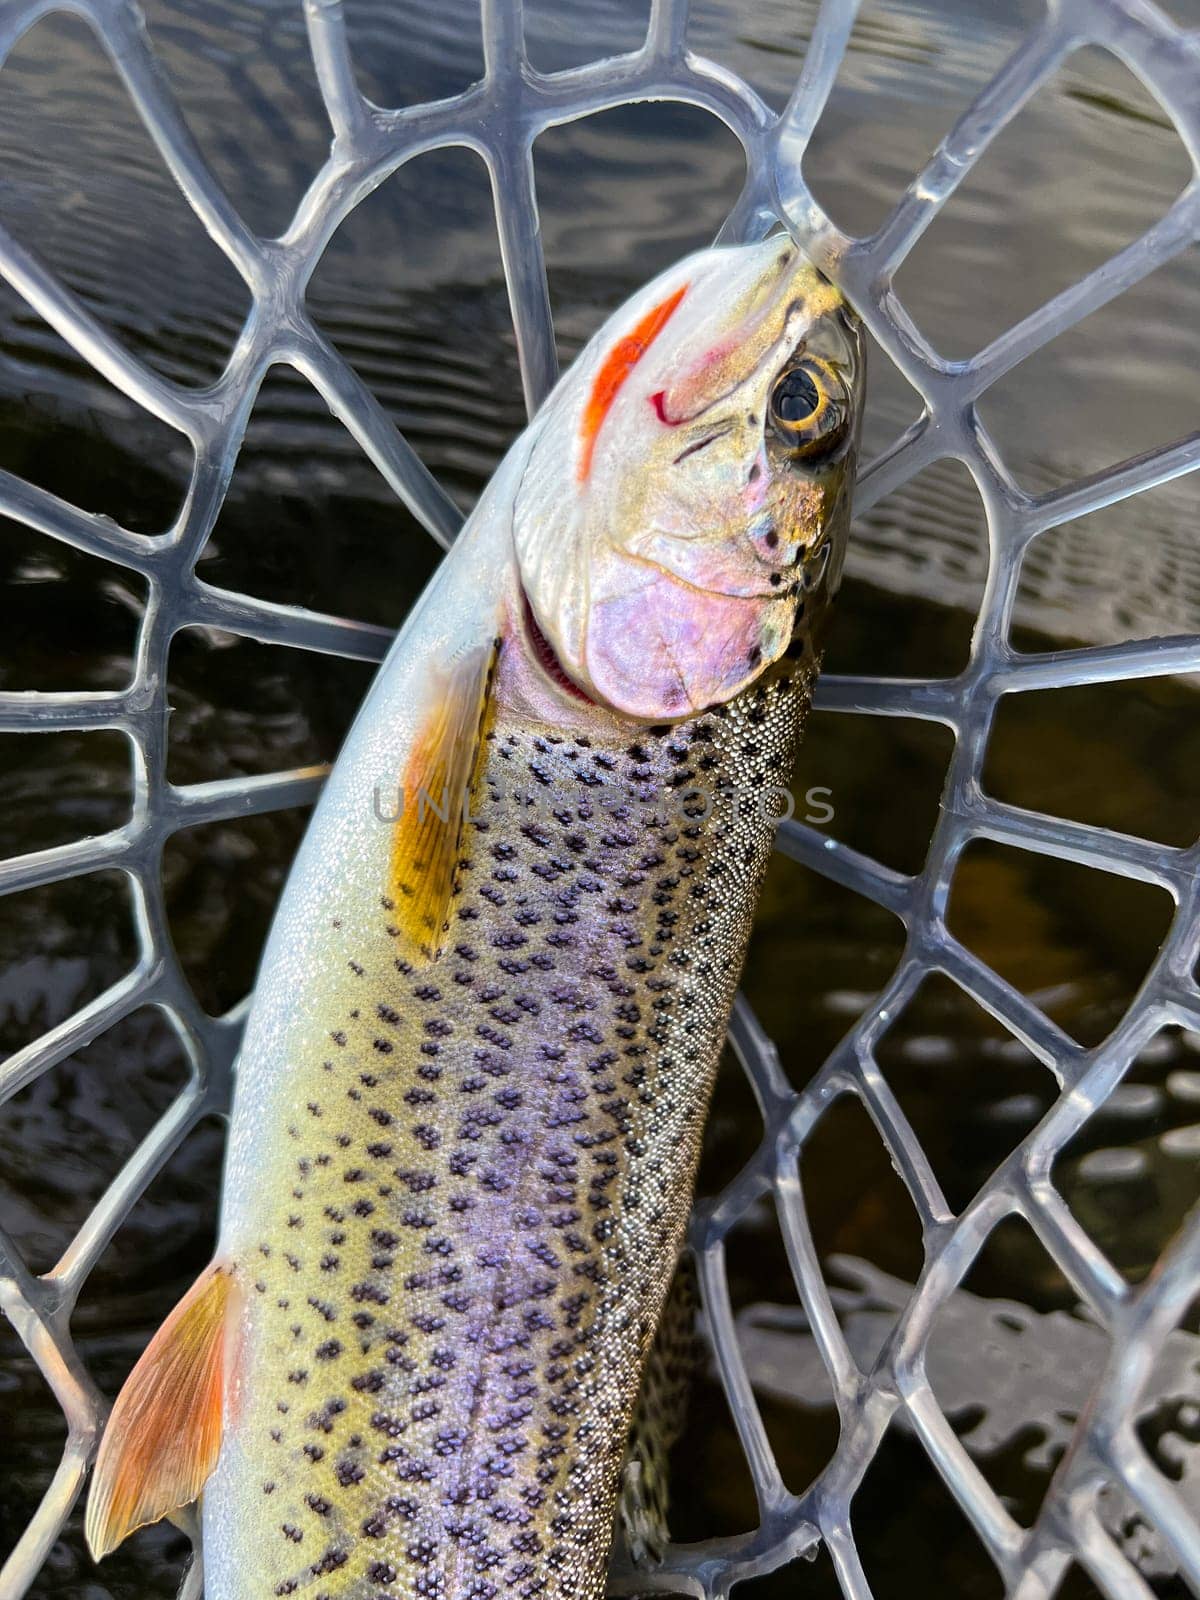 Native, wild coastal cutthroat trout in a rubber net caught during ctch and release fly fishing on a river in Oregon.